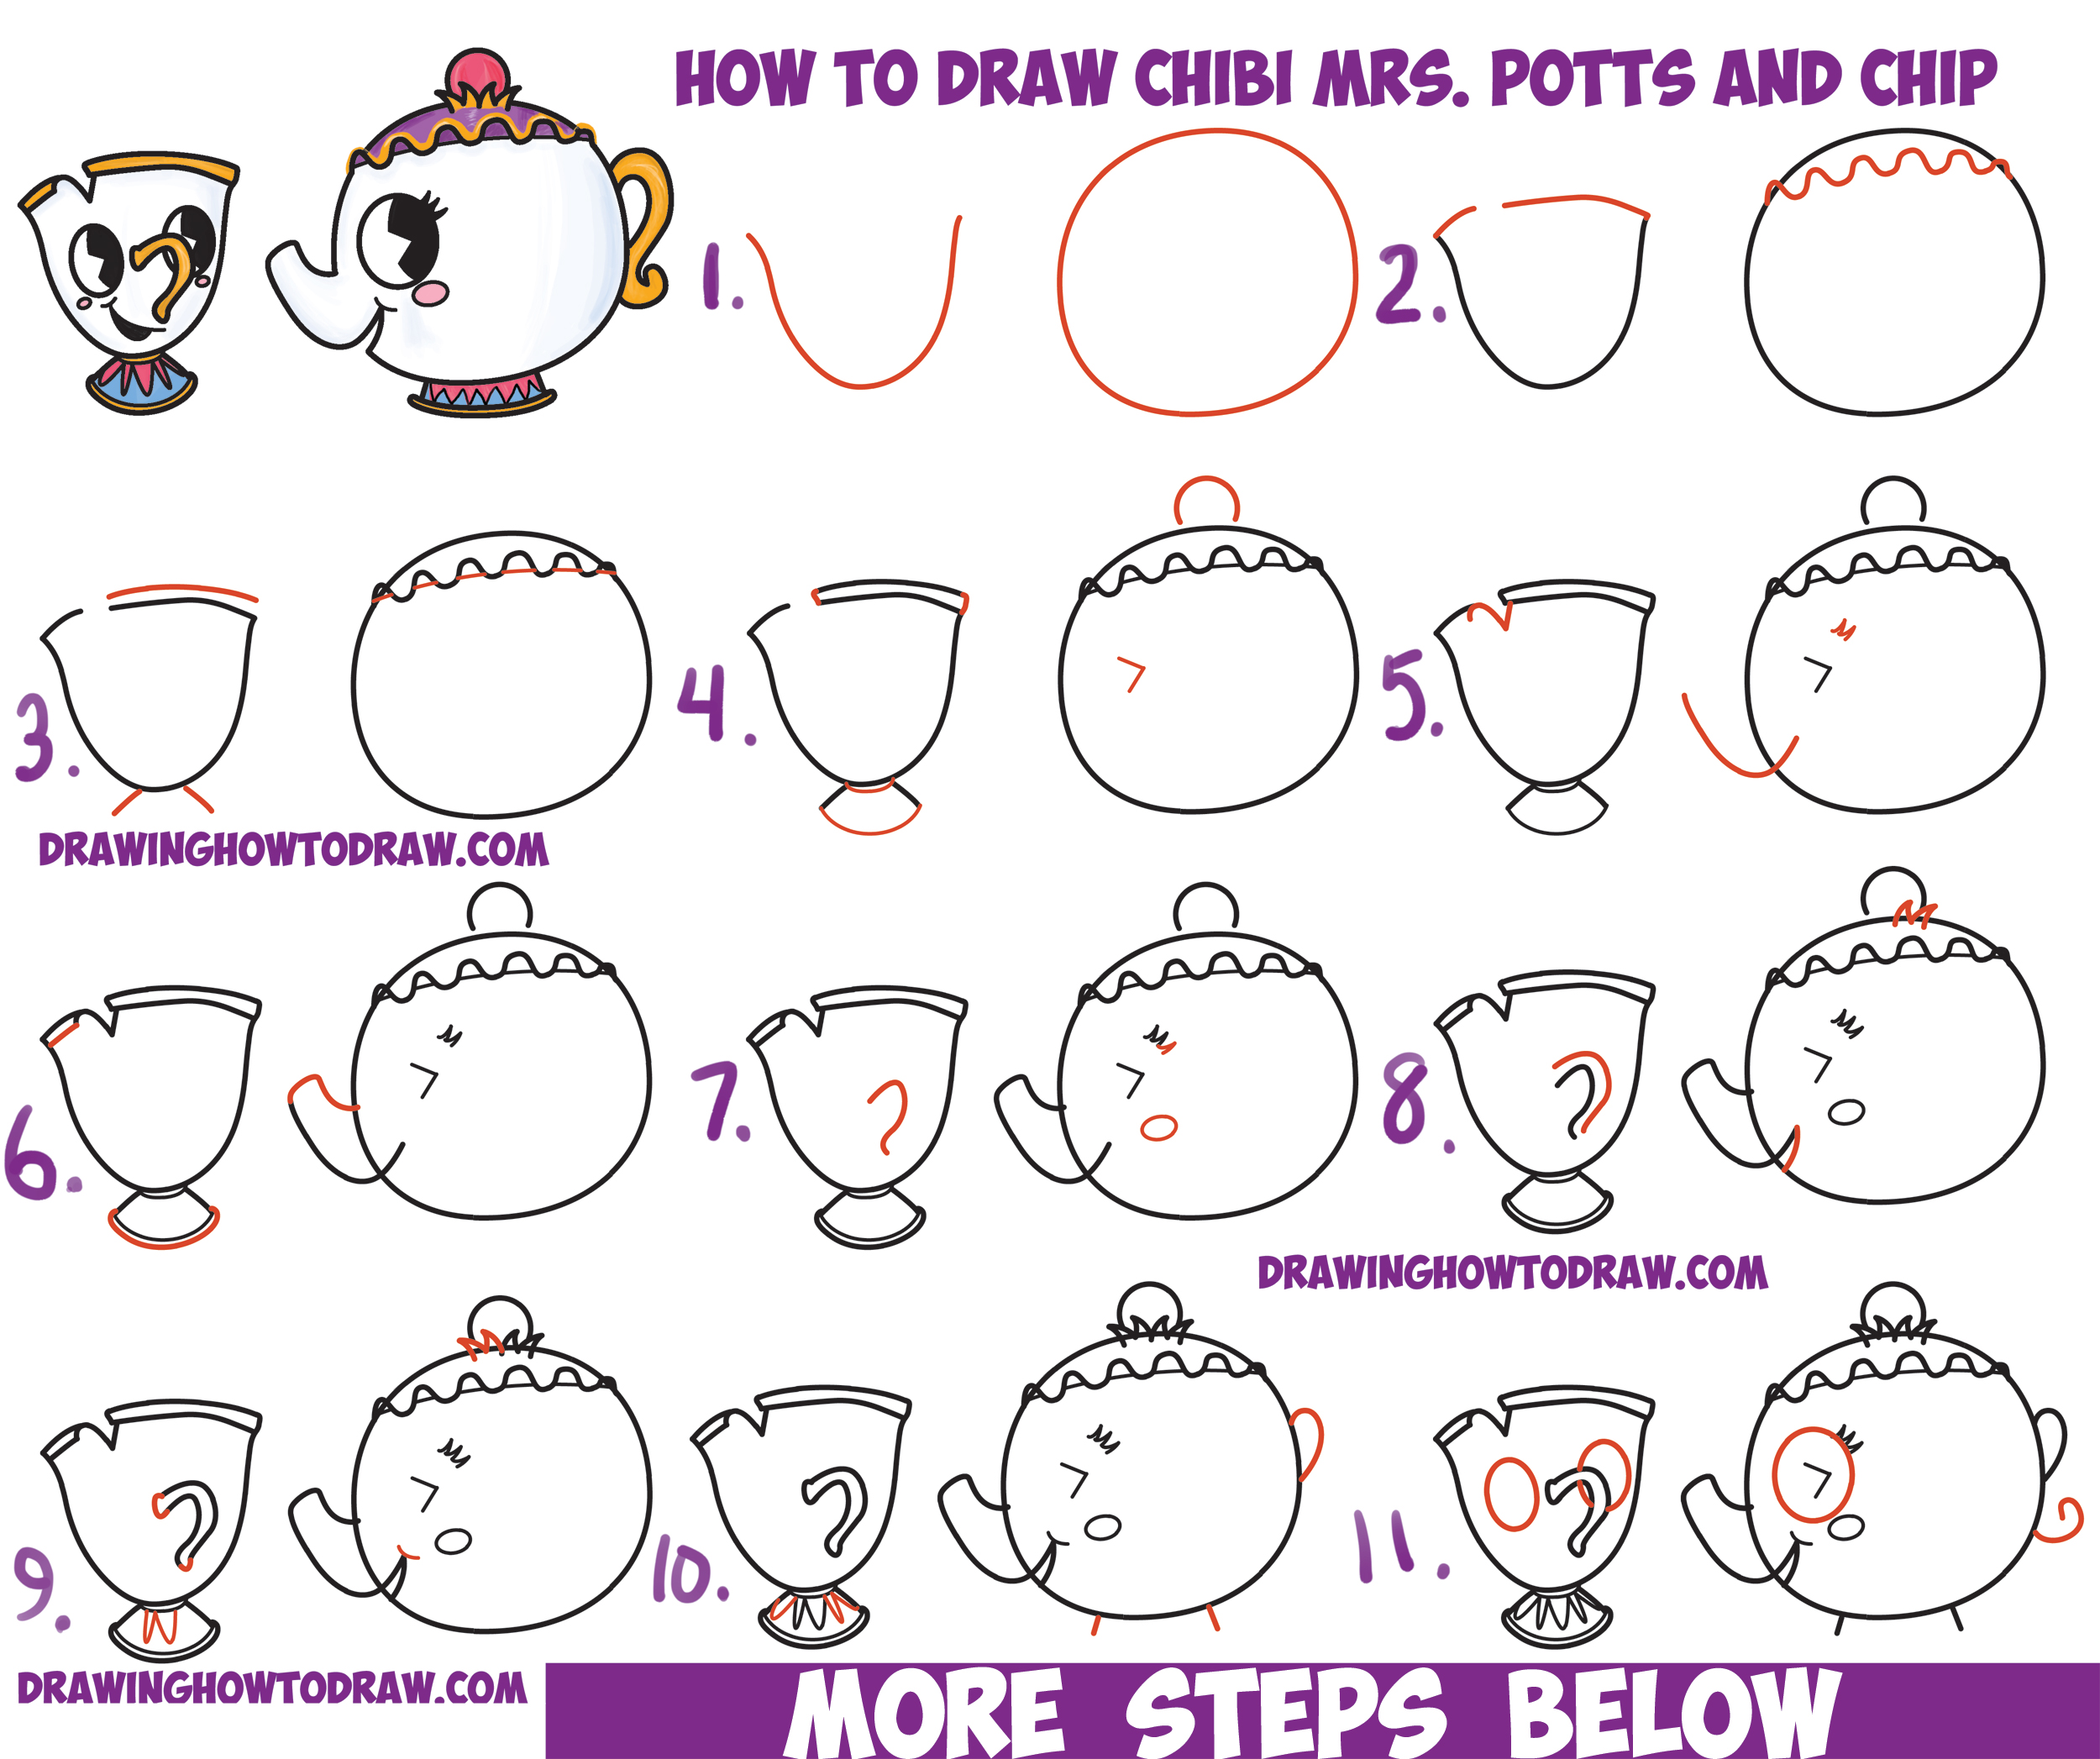 How to Draw Cute Kawaii / Chibi Mrs. Potts and Chip from Beauty and the